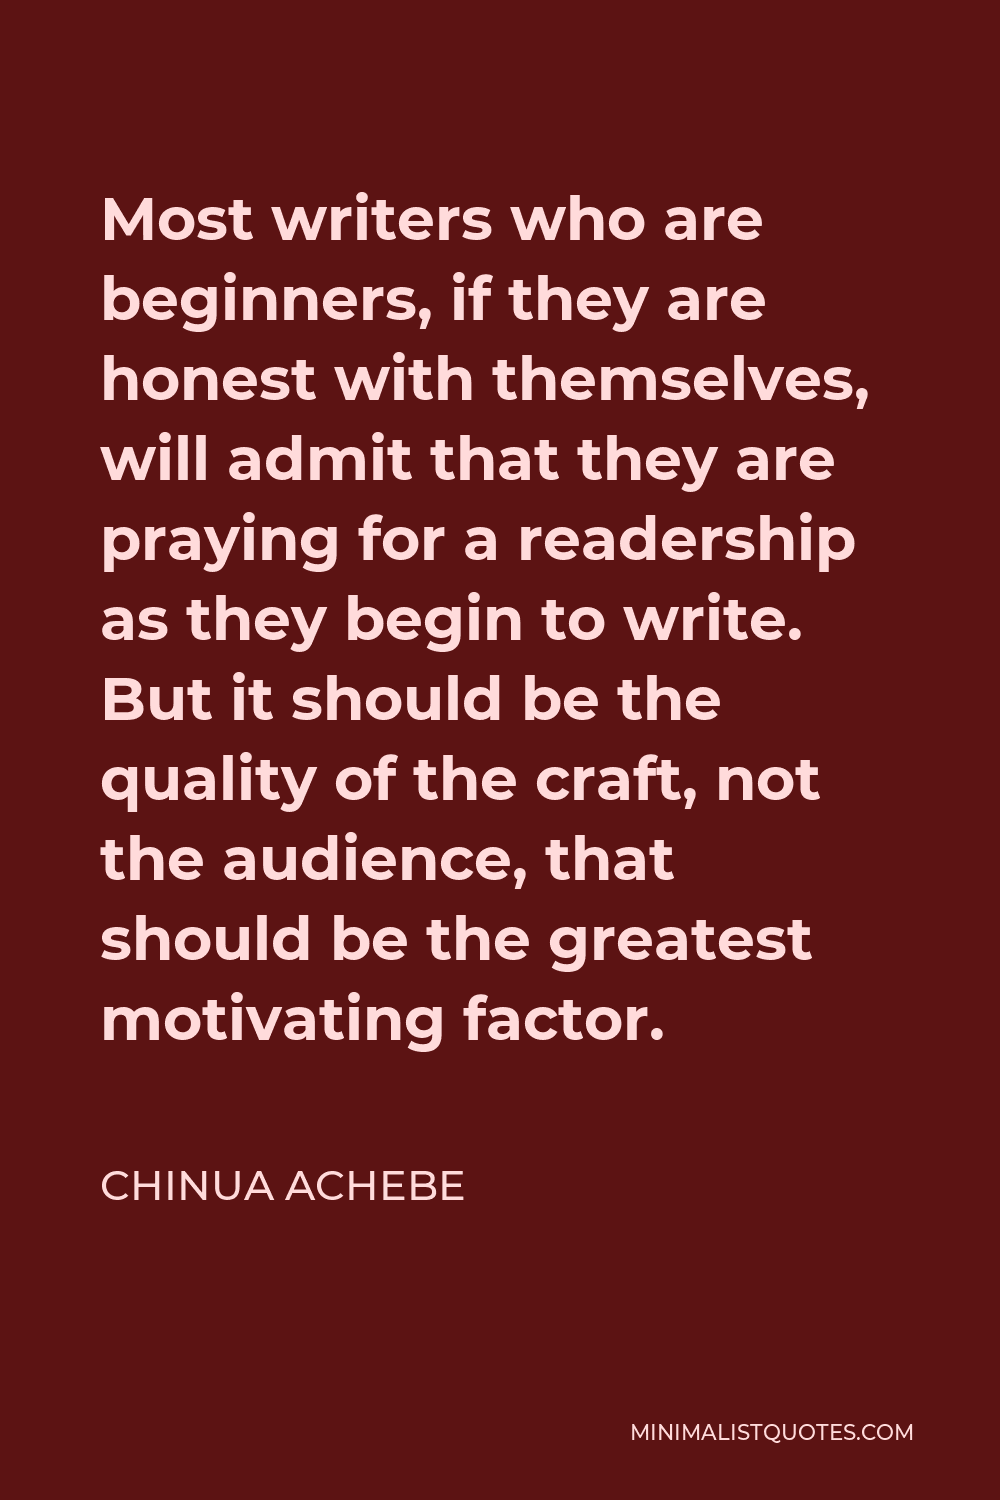 Chinua Achebe Quote - Most writers who are beginners, if they are honest with themselves, will admit that they are praying for a readership as they begin to write. But it should be the quality of the craft, not the audience, that should be the greatest motivating factor.